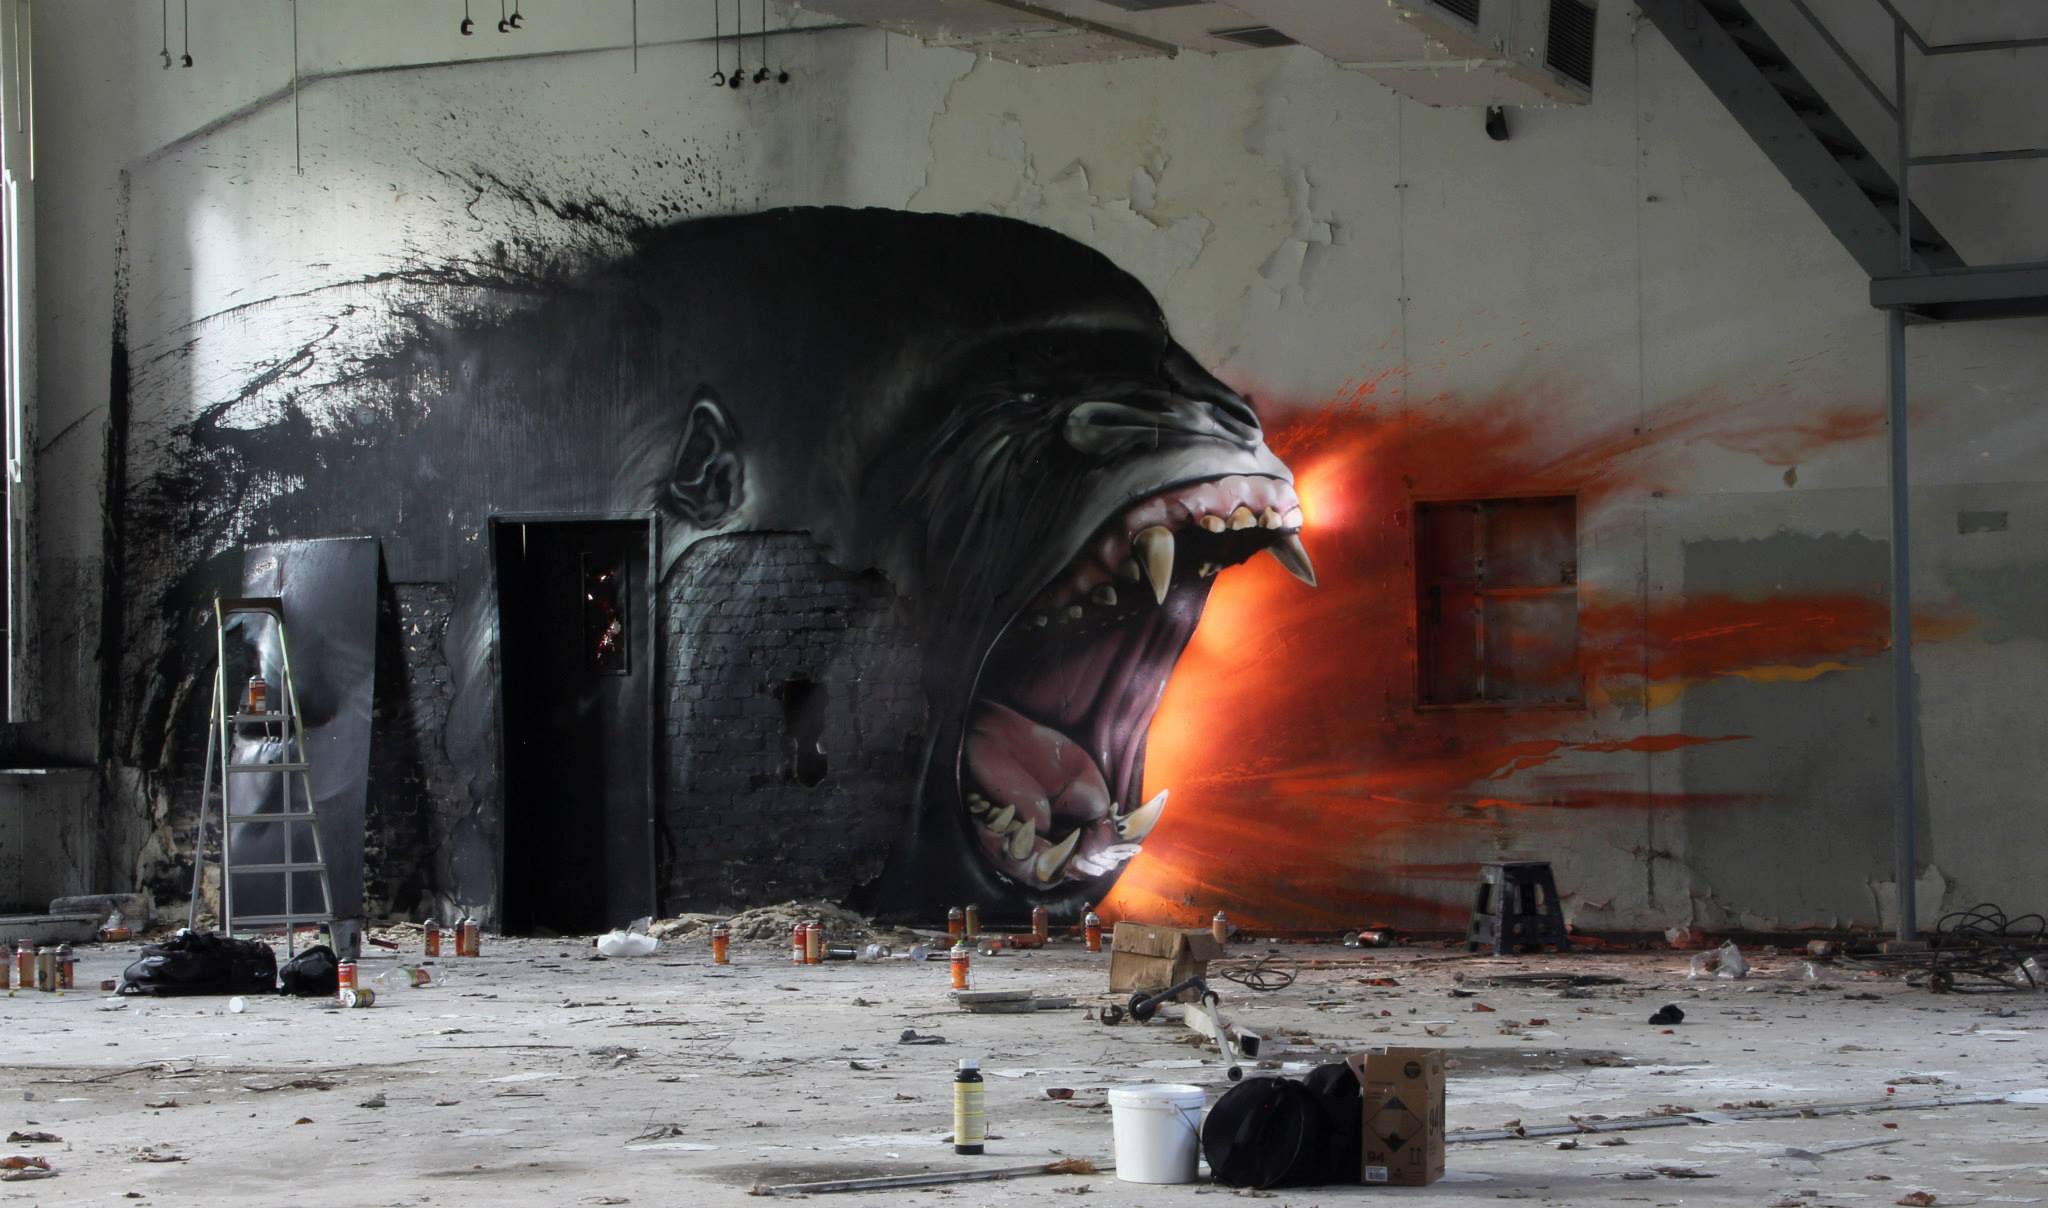 NORM in aBANDONED AREA | Street Art Hub